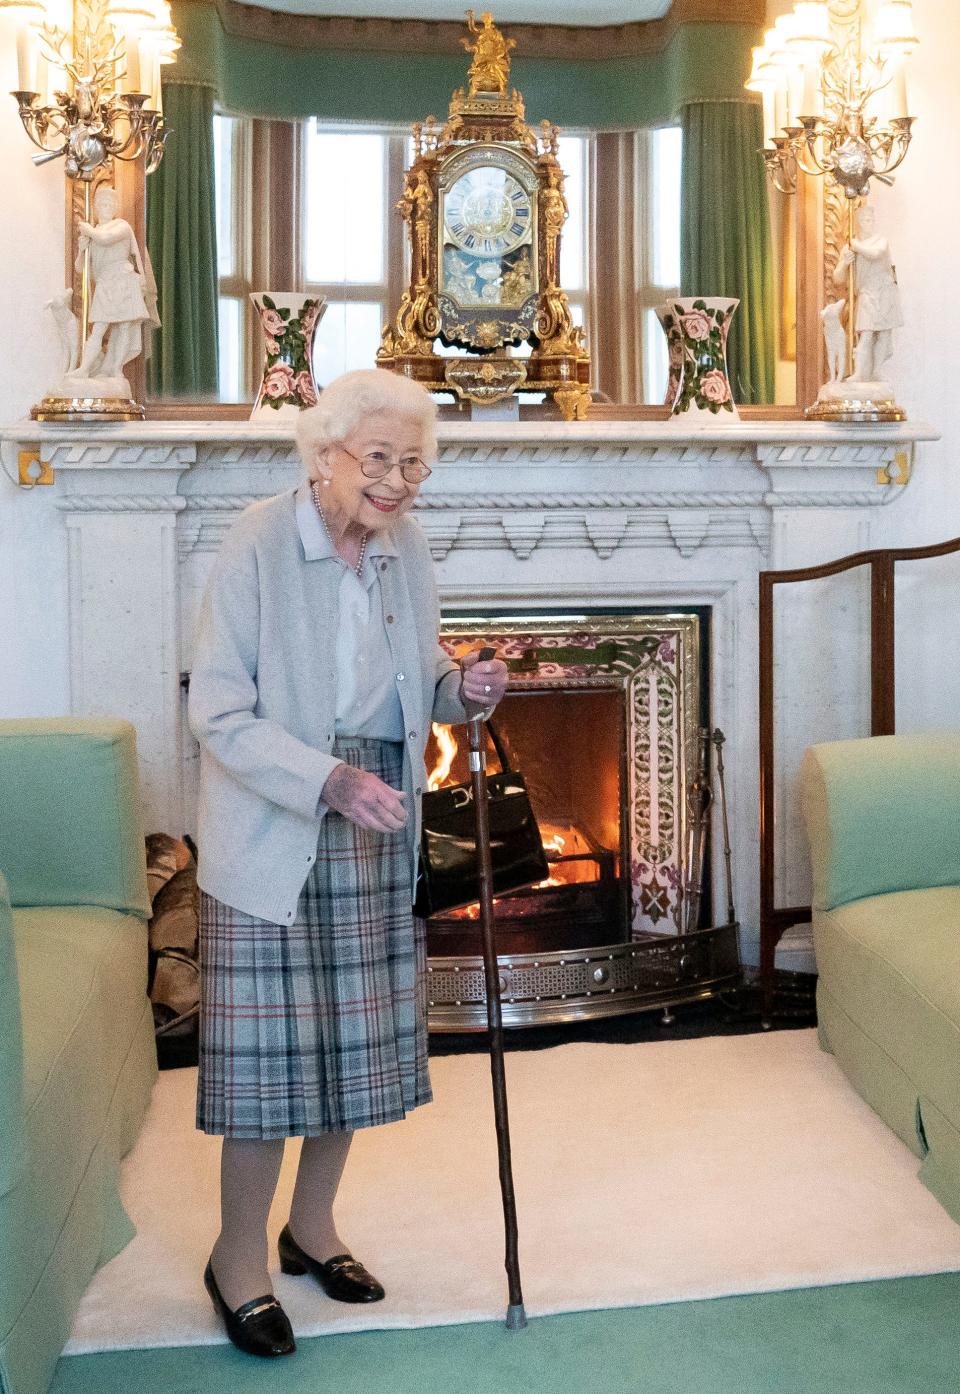 Queen Elizabeth II waits in the Drawing Room at Balmoral Castle in Scotland before Liz Truss, newly elected leader of the Conservative Party, arrived to meet the monarch and be invited to become prime minister and form a new government, on Sept. 6, 2022. The queen broke with the tradition of meeting the new prime minister at Buckingham Palace due to mobility issues.